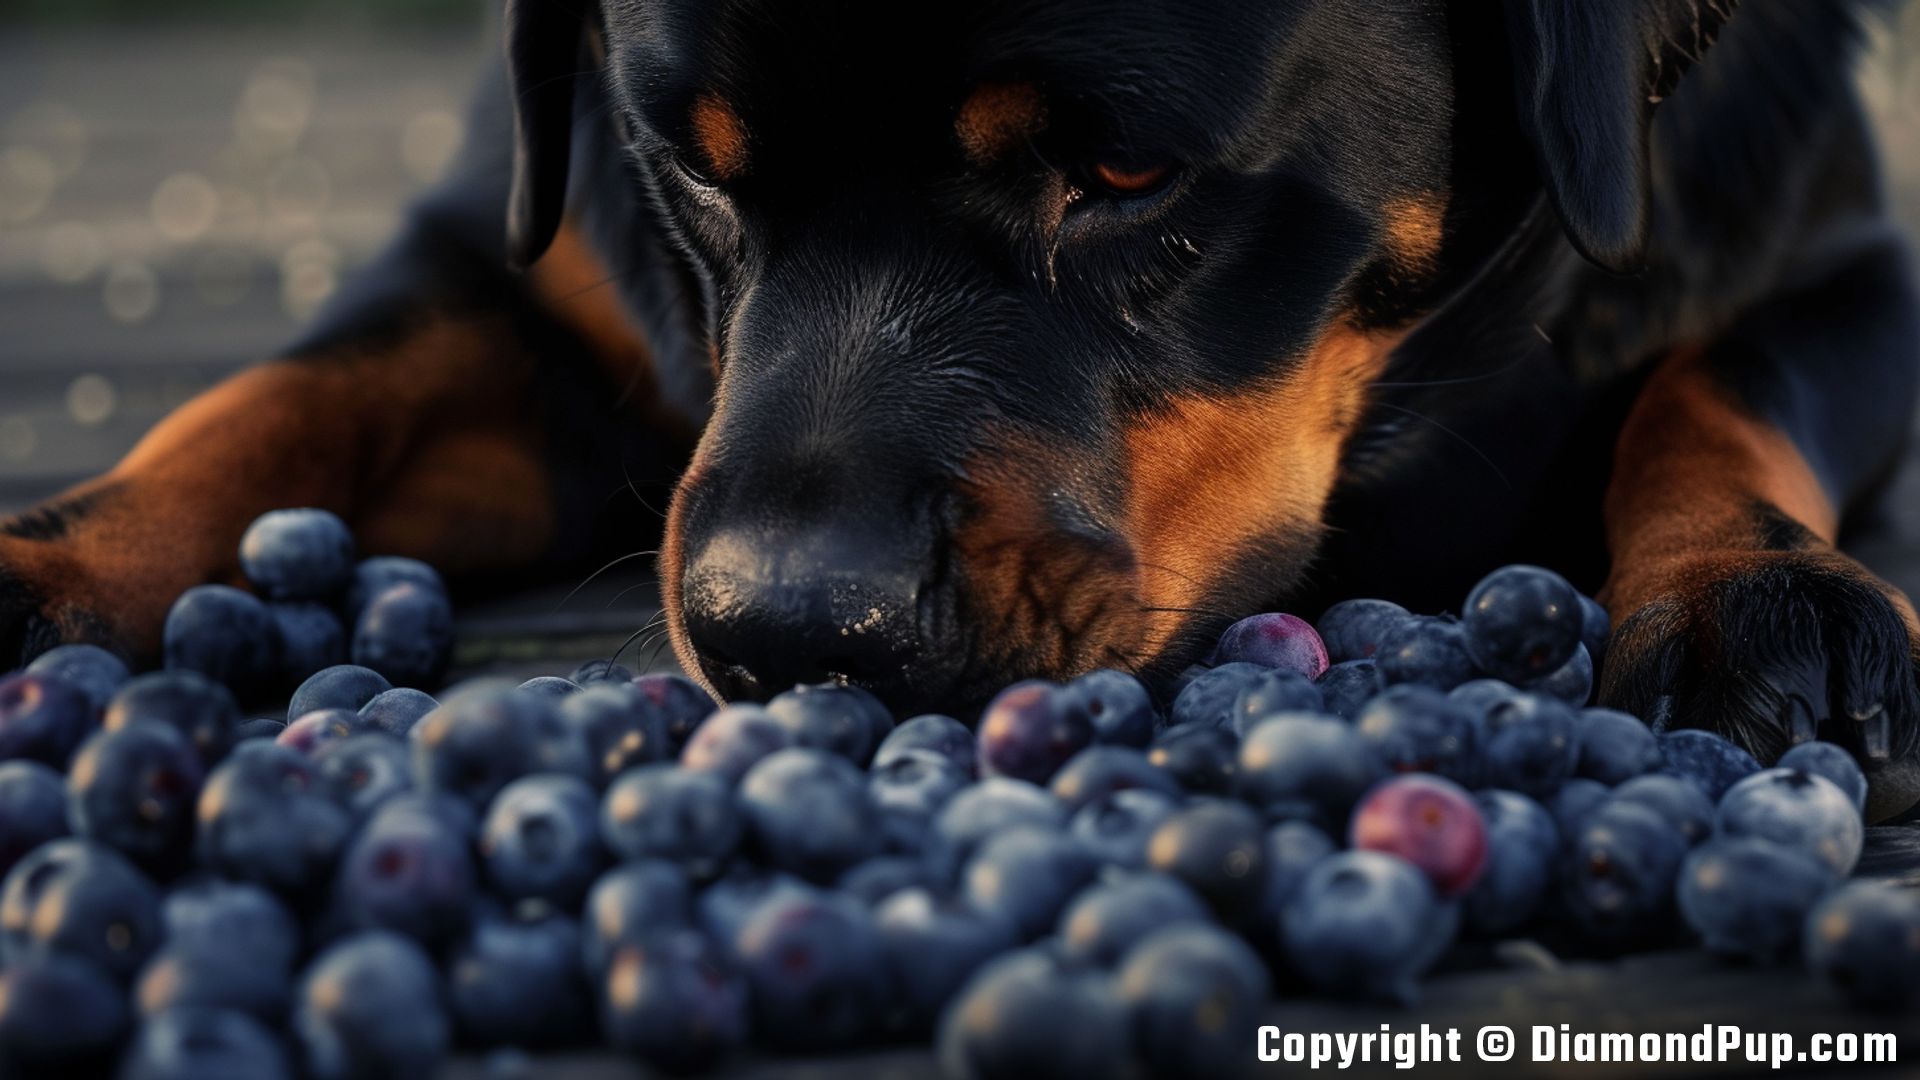 Image of a Playful Rottweiler Snacking on Blueberries